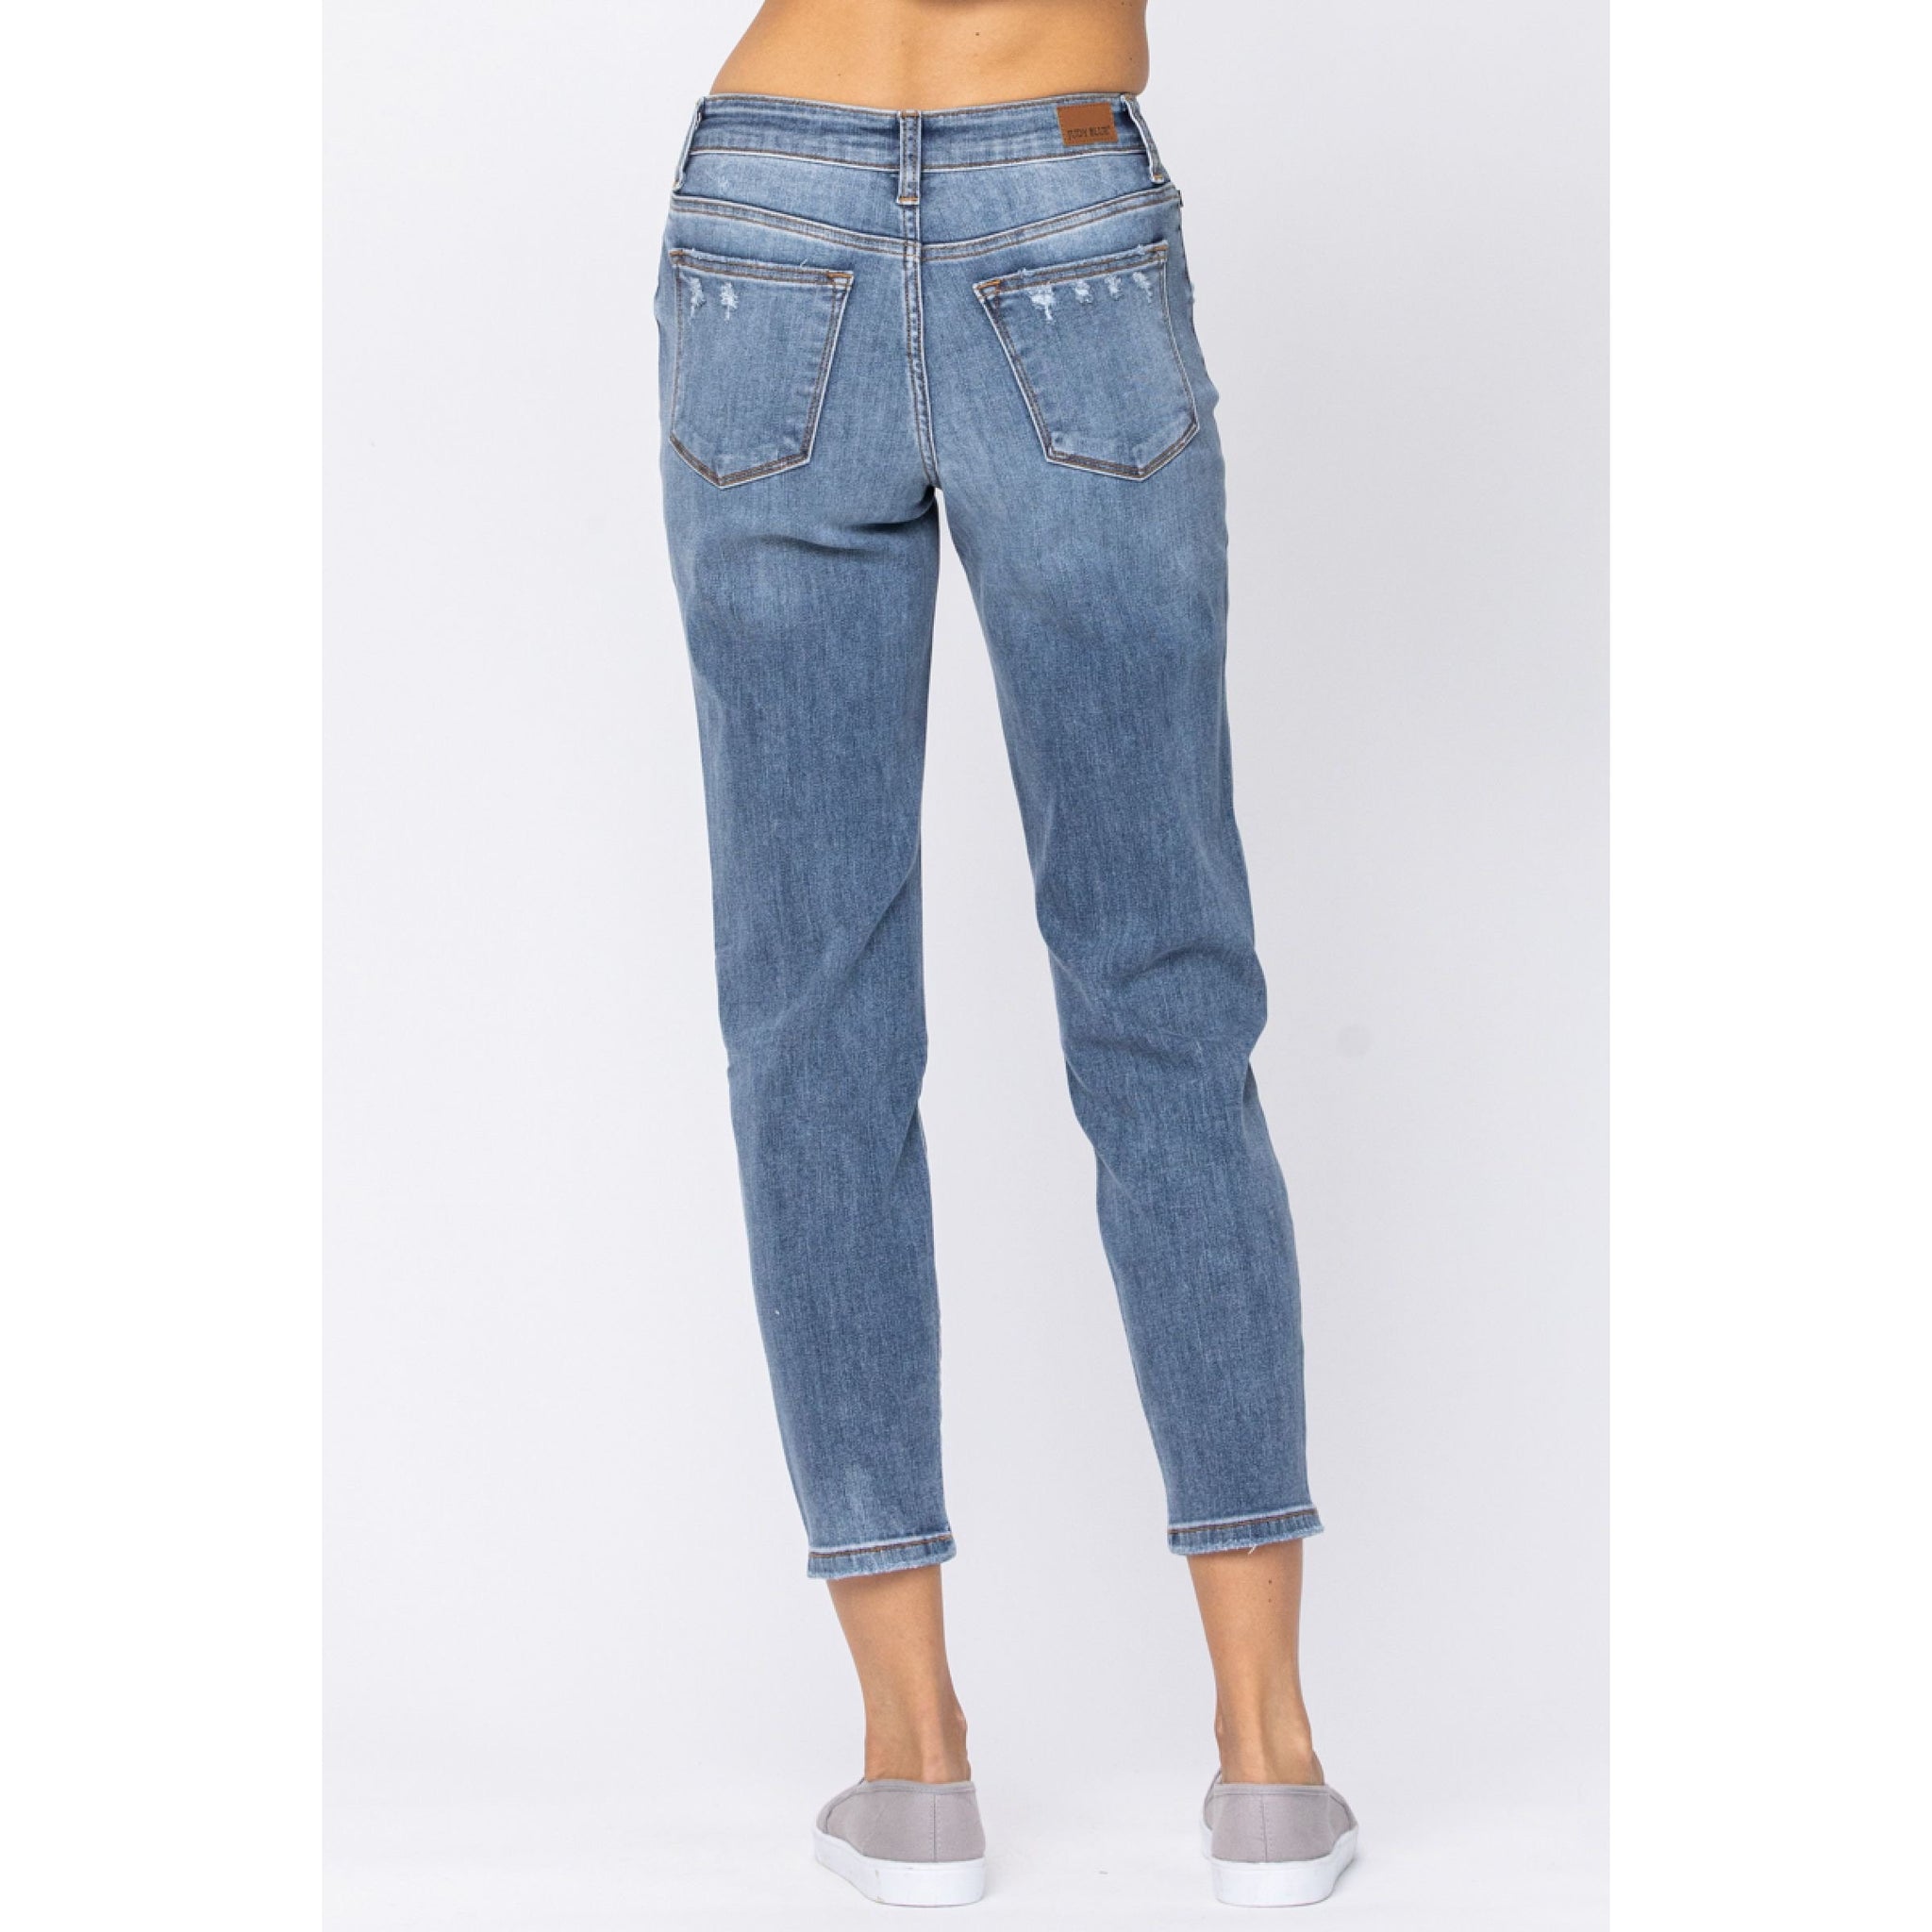 Judy Blue Distressed Slim Fit Jeans - Style 82172 - Truly Simple Boutique